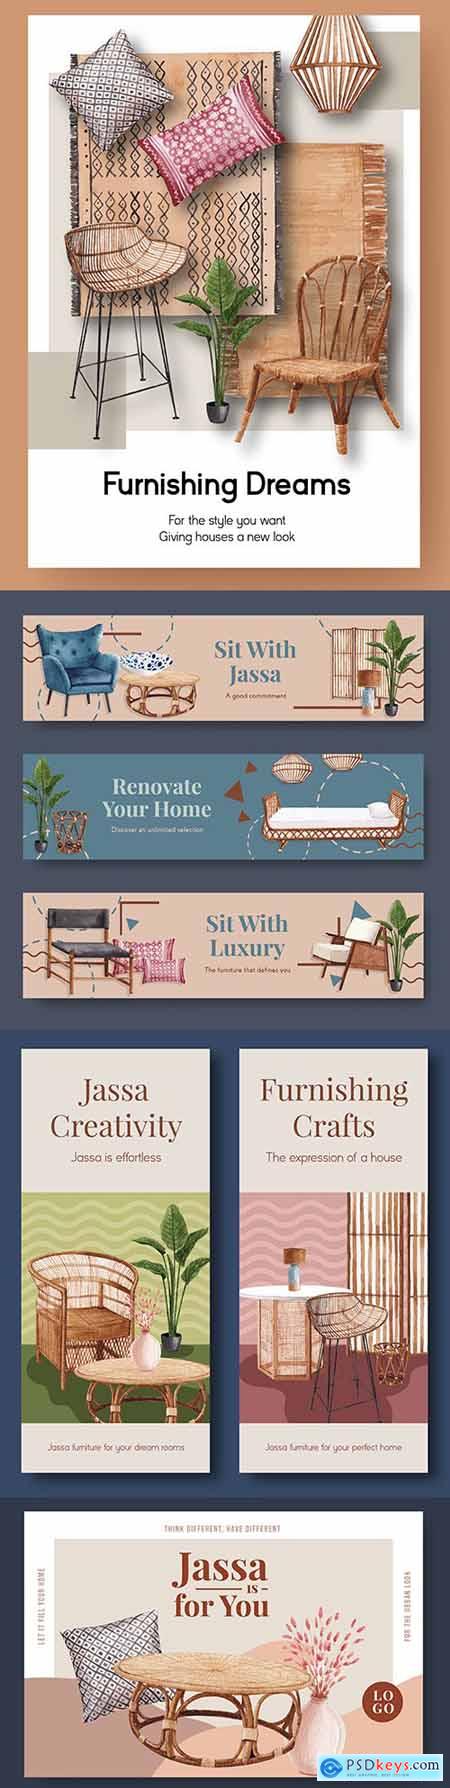 Furniture jassa for brochure and advertising watercolor illustrations